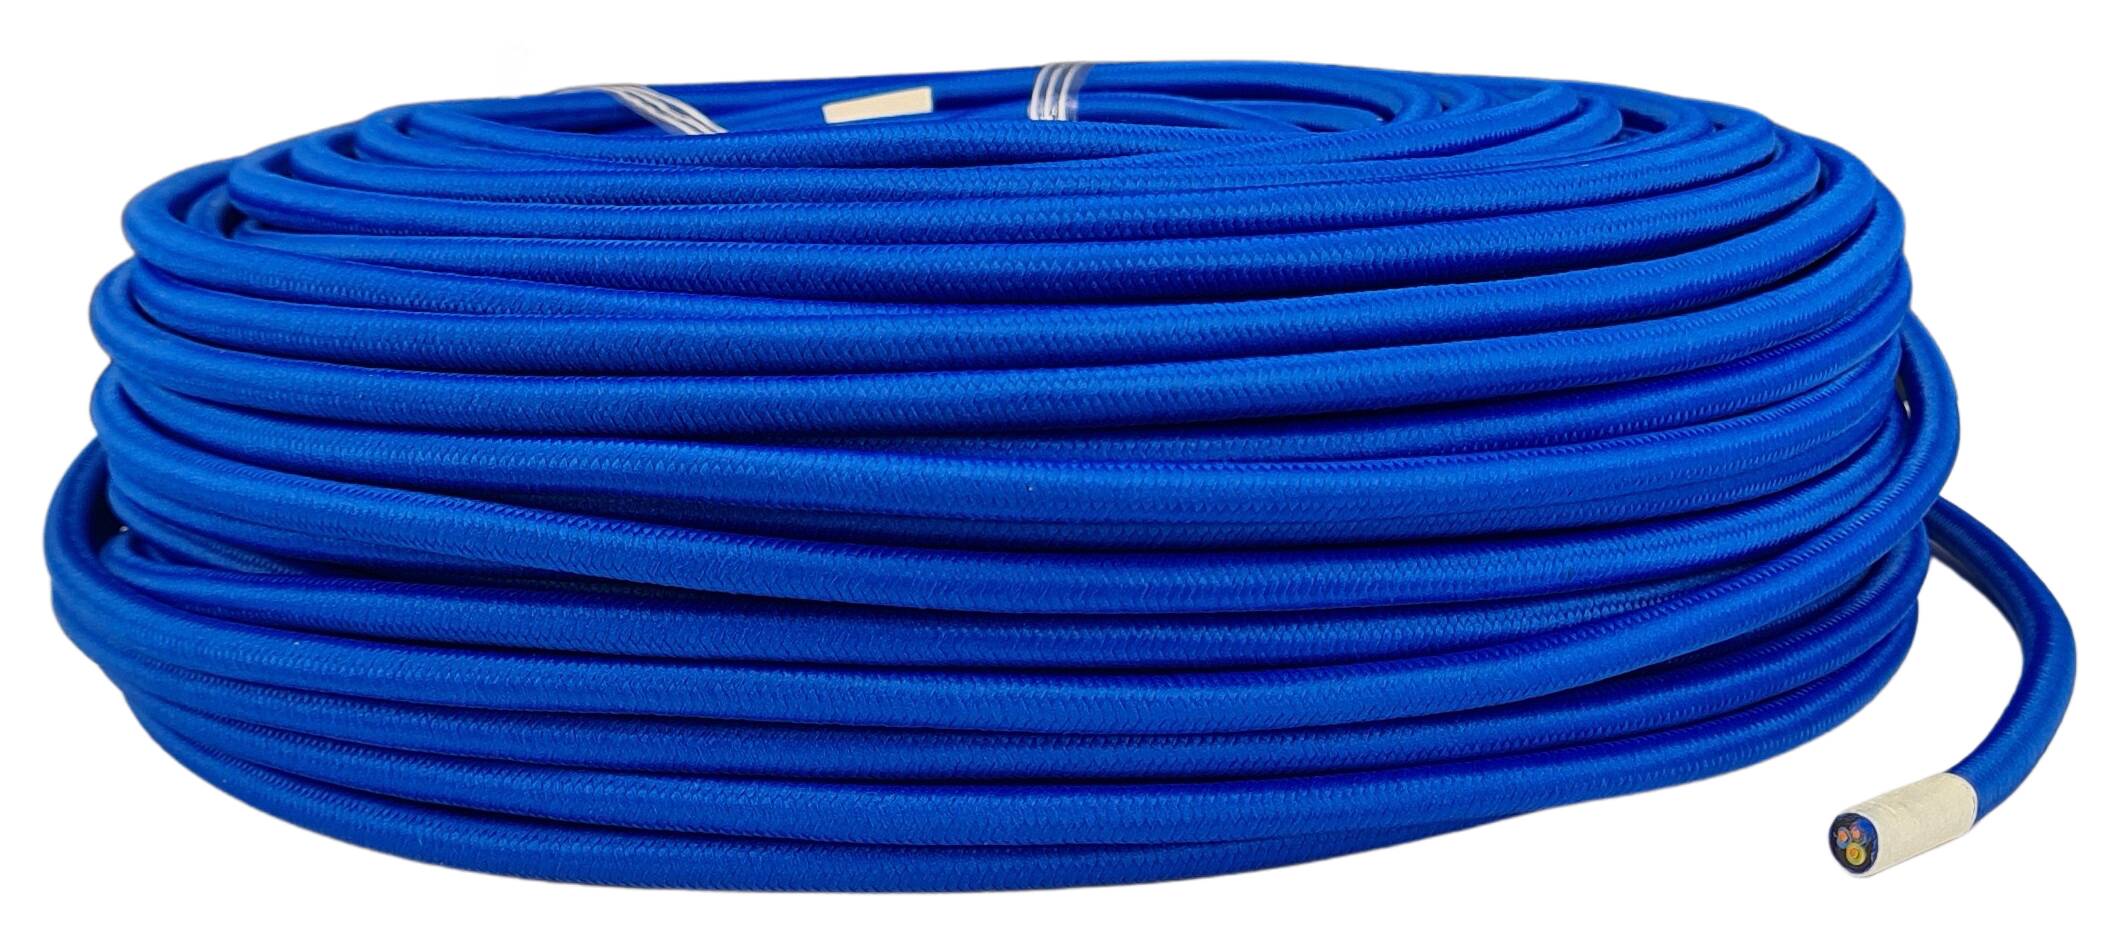 cable 3G 0,75 H33VV-F textile coated RAL 5002 dark blue